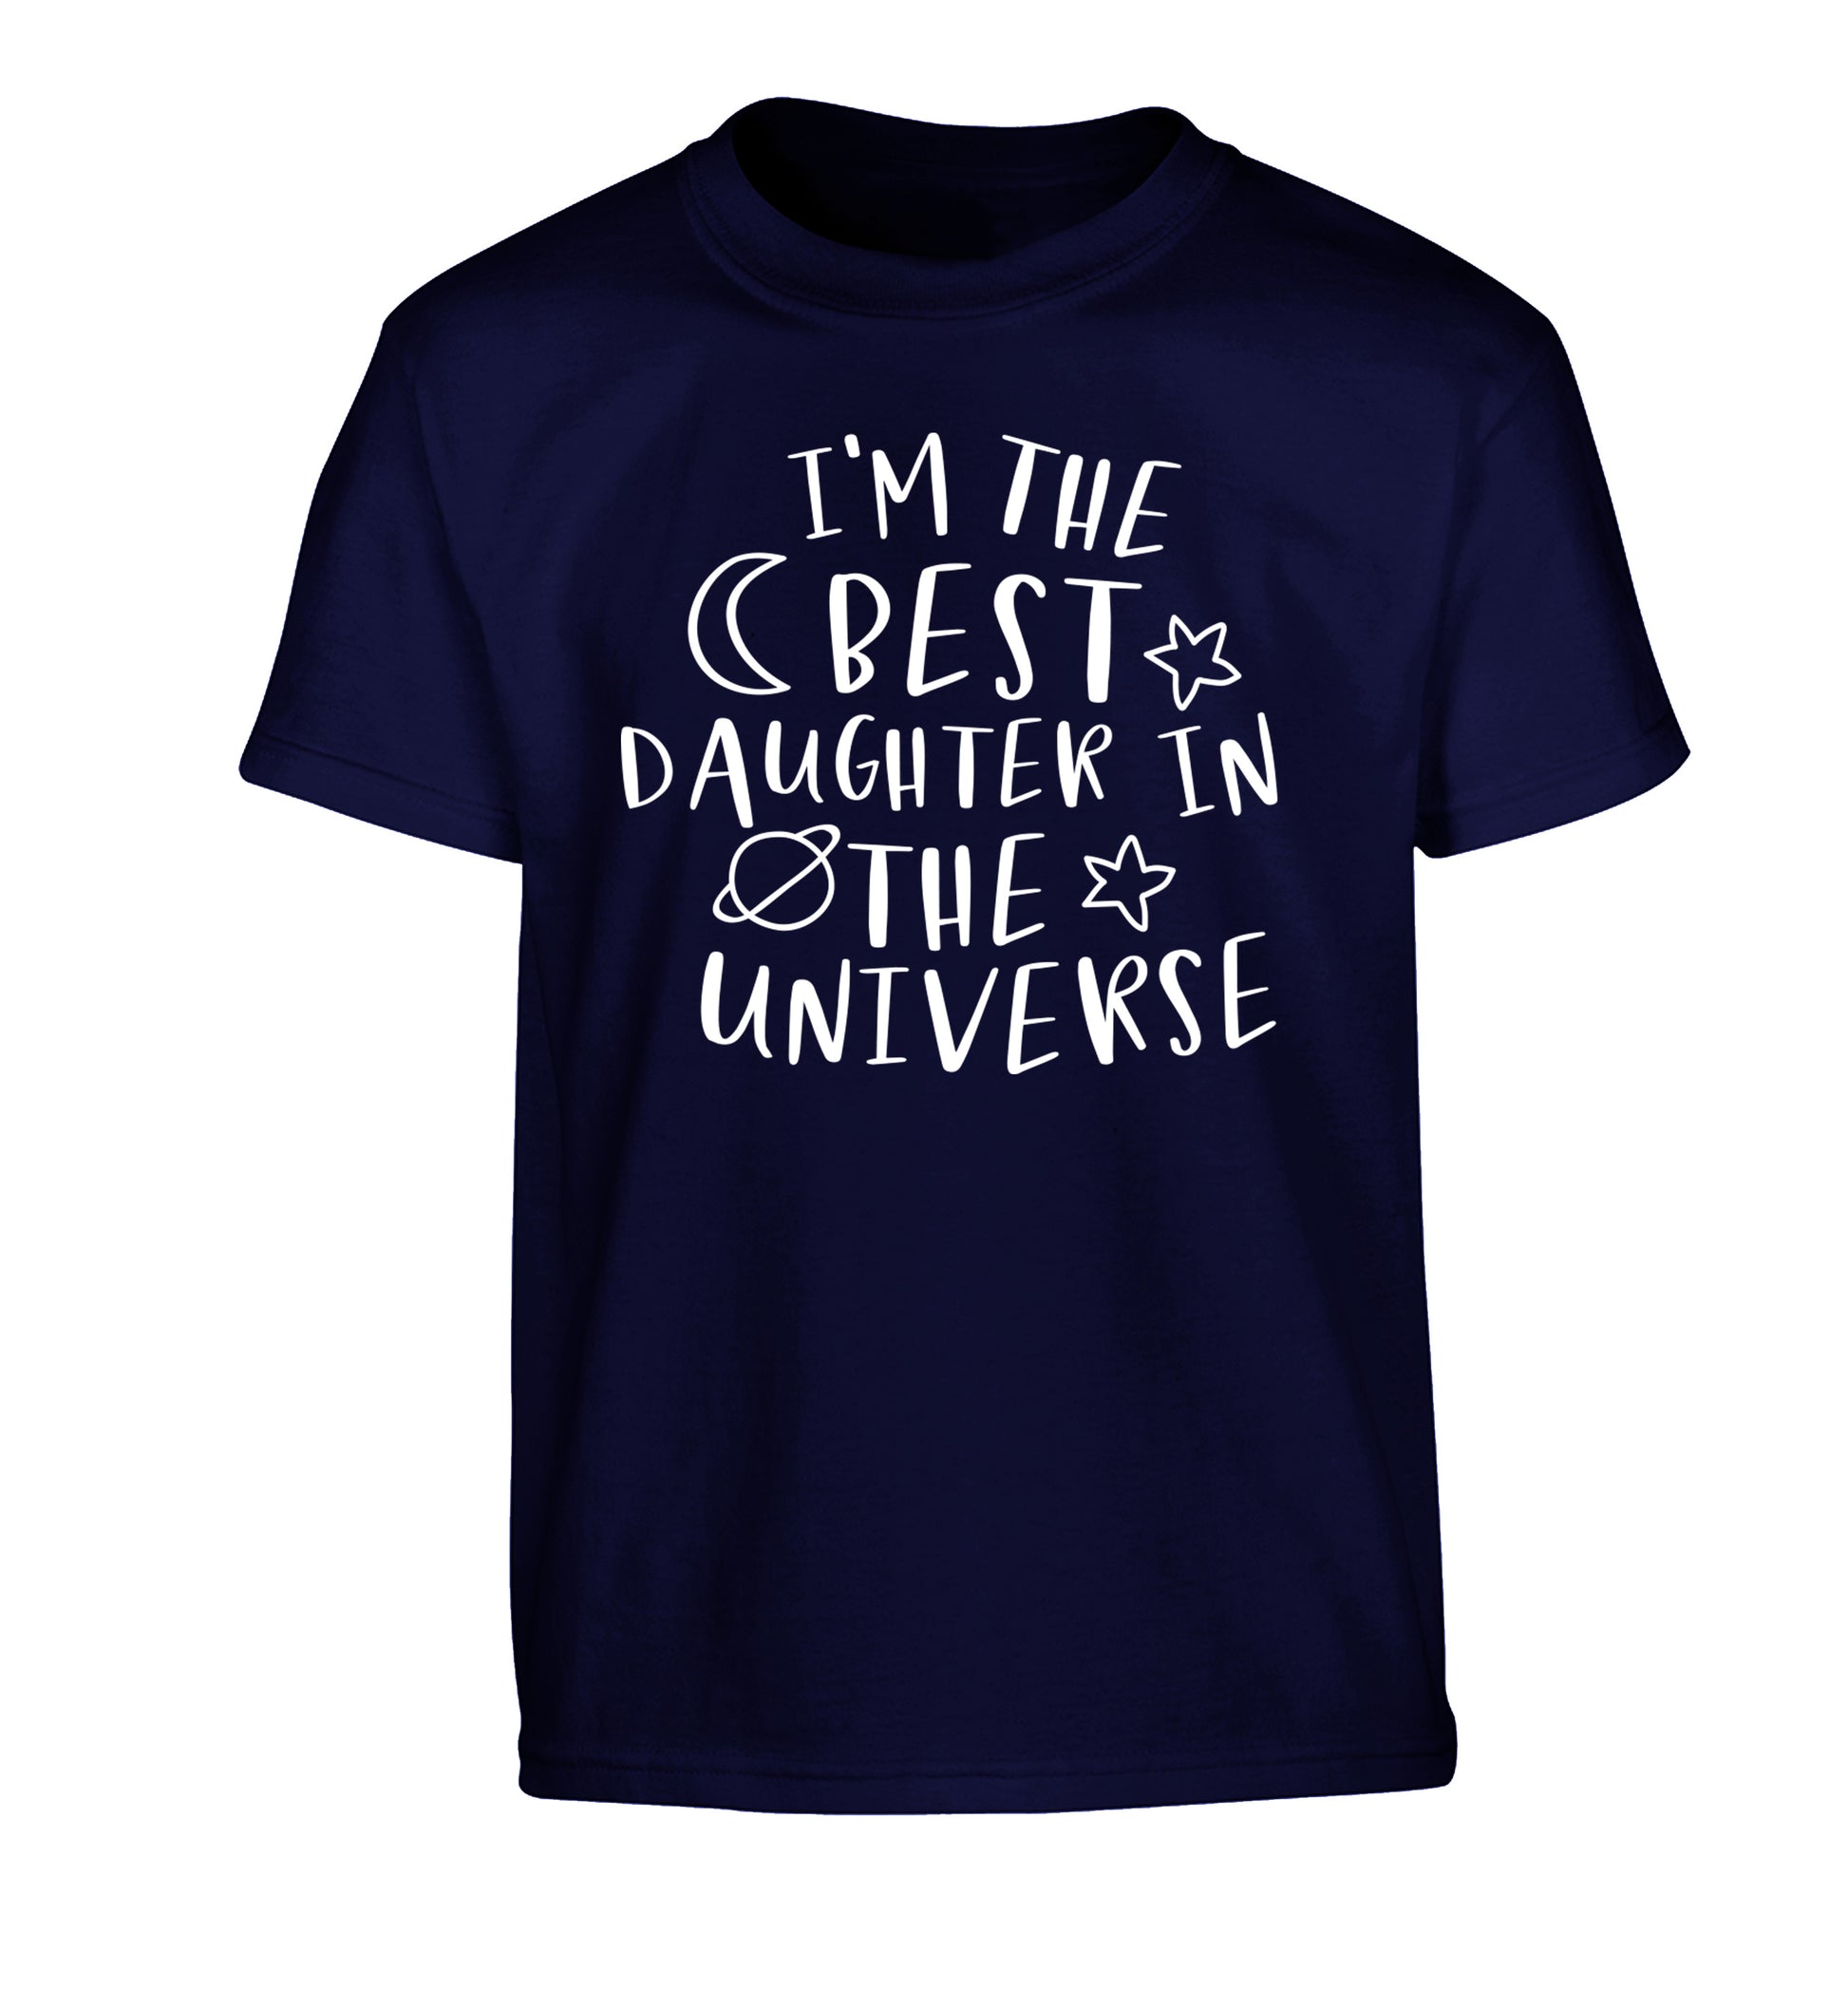 I'm the best daughter in the universe Children's navy Tshirt 12-13 Years